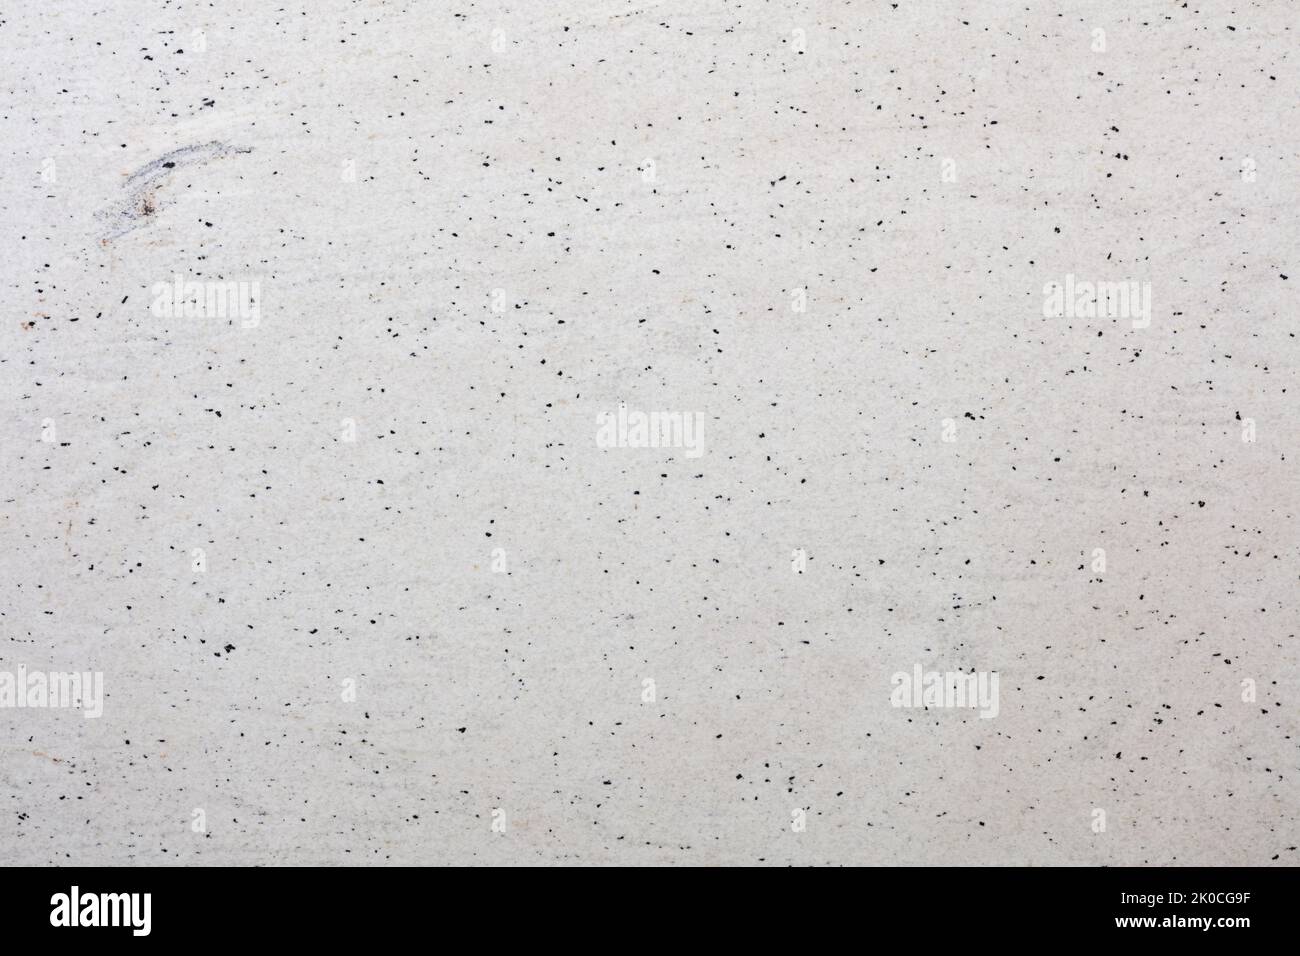 Perfect White Granite texture, background in light tone for your design work. Slab photo. Closeup surface grunge stone texture, mate natural granite Stock Photo